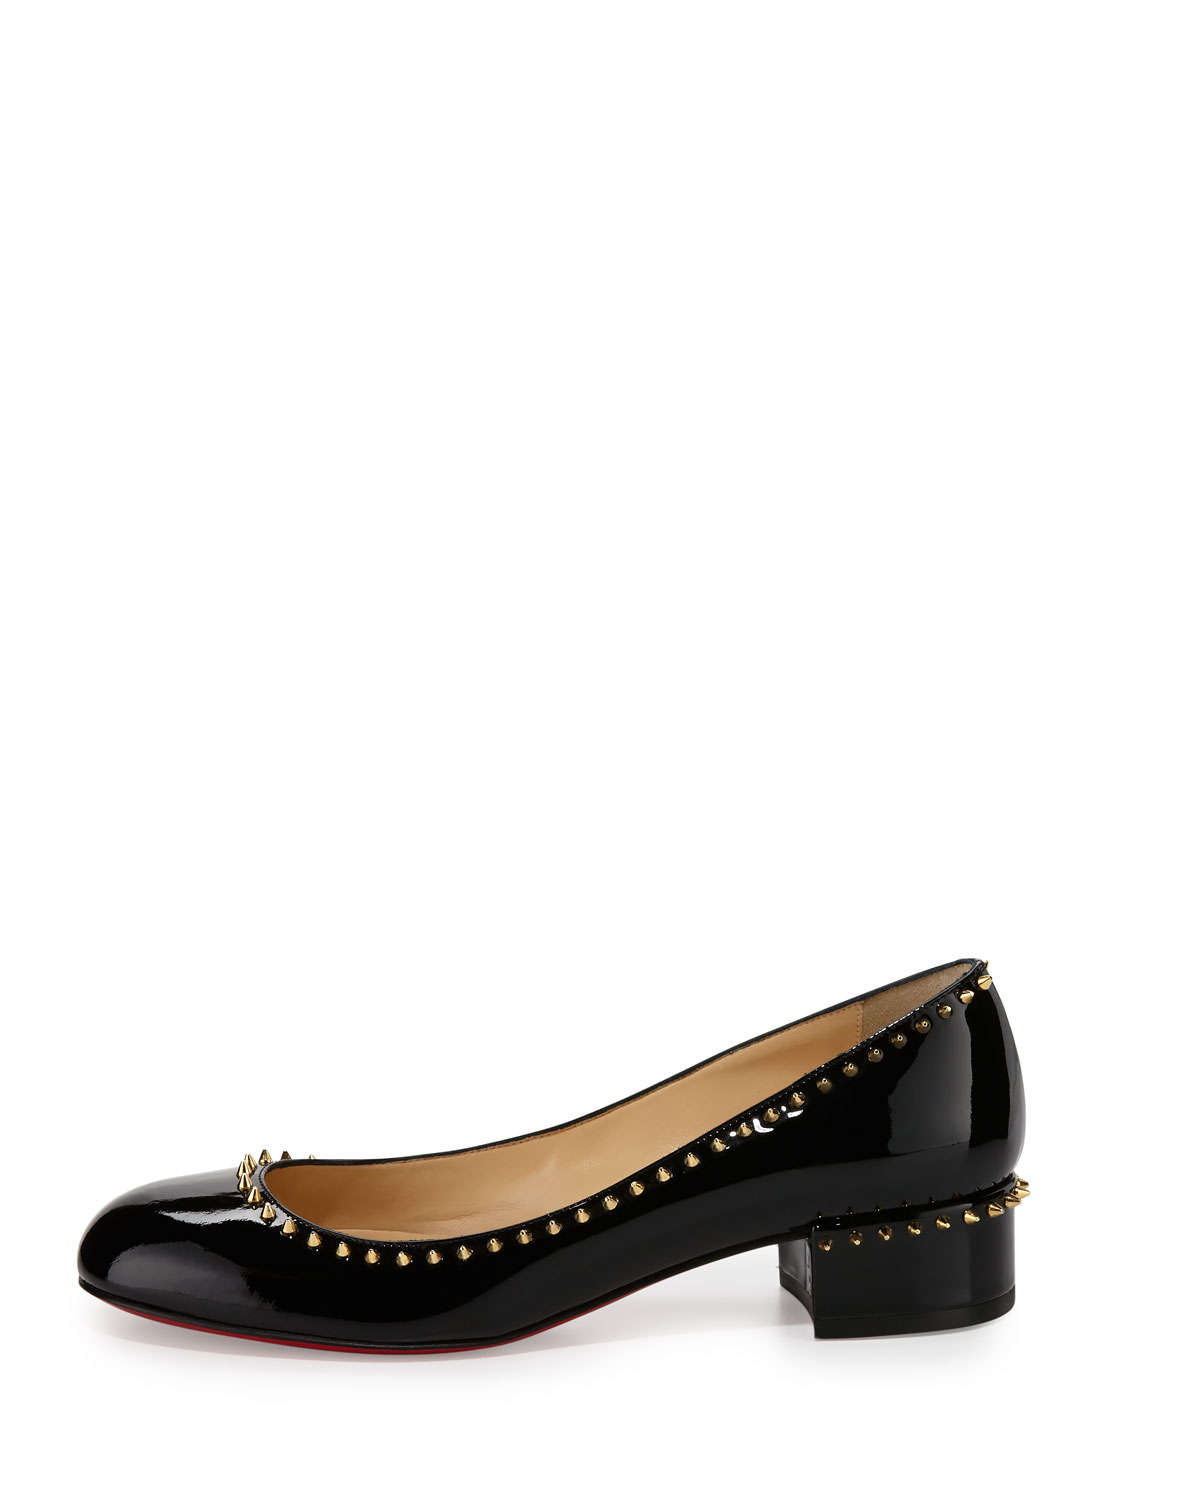 black spiked louis vuitton shoes - Christian louboutin Treliliane Patent-Leather Pumps in Black | Lyst